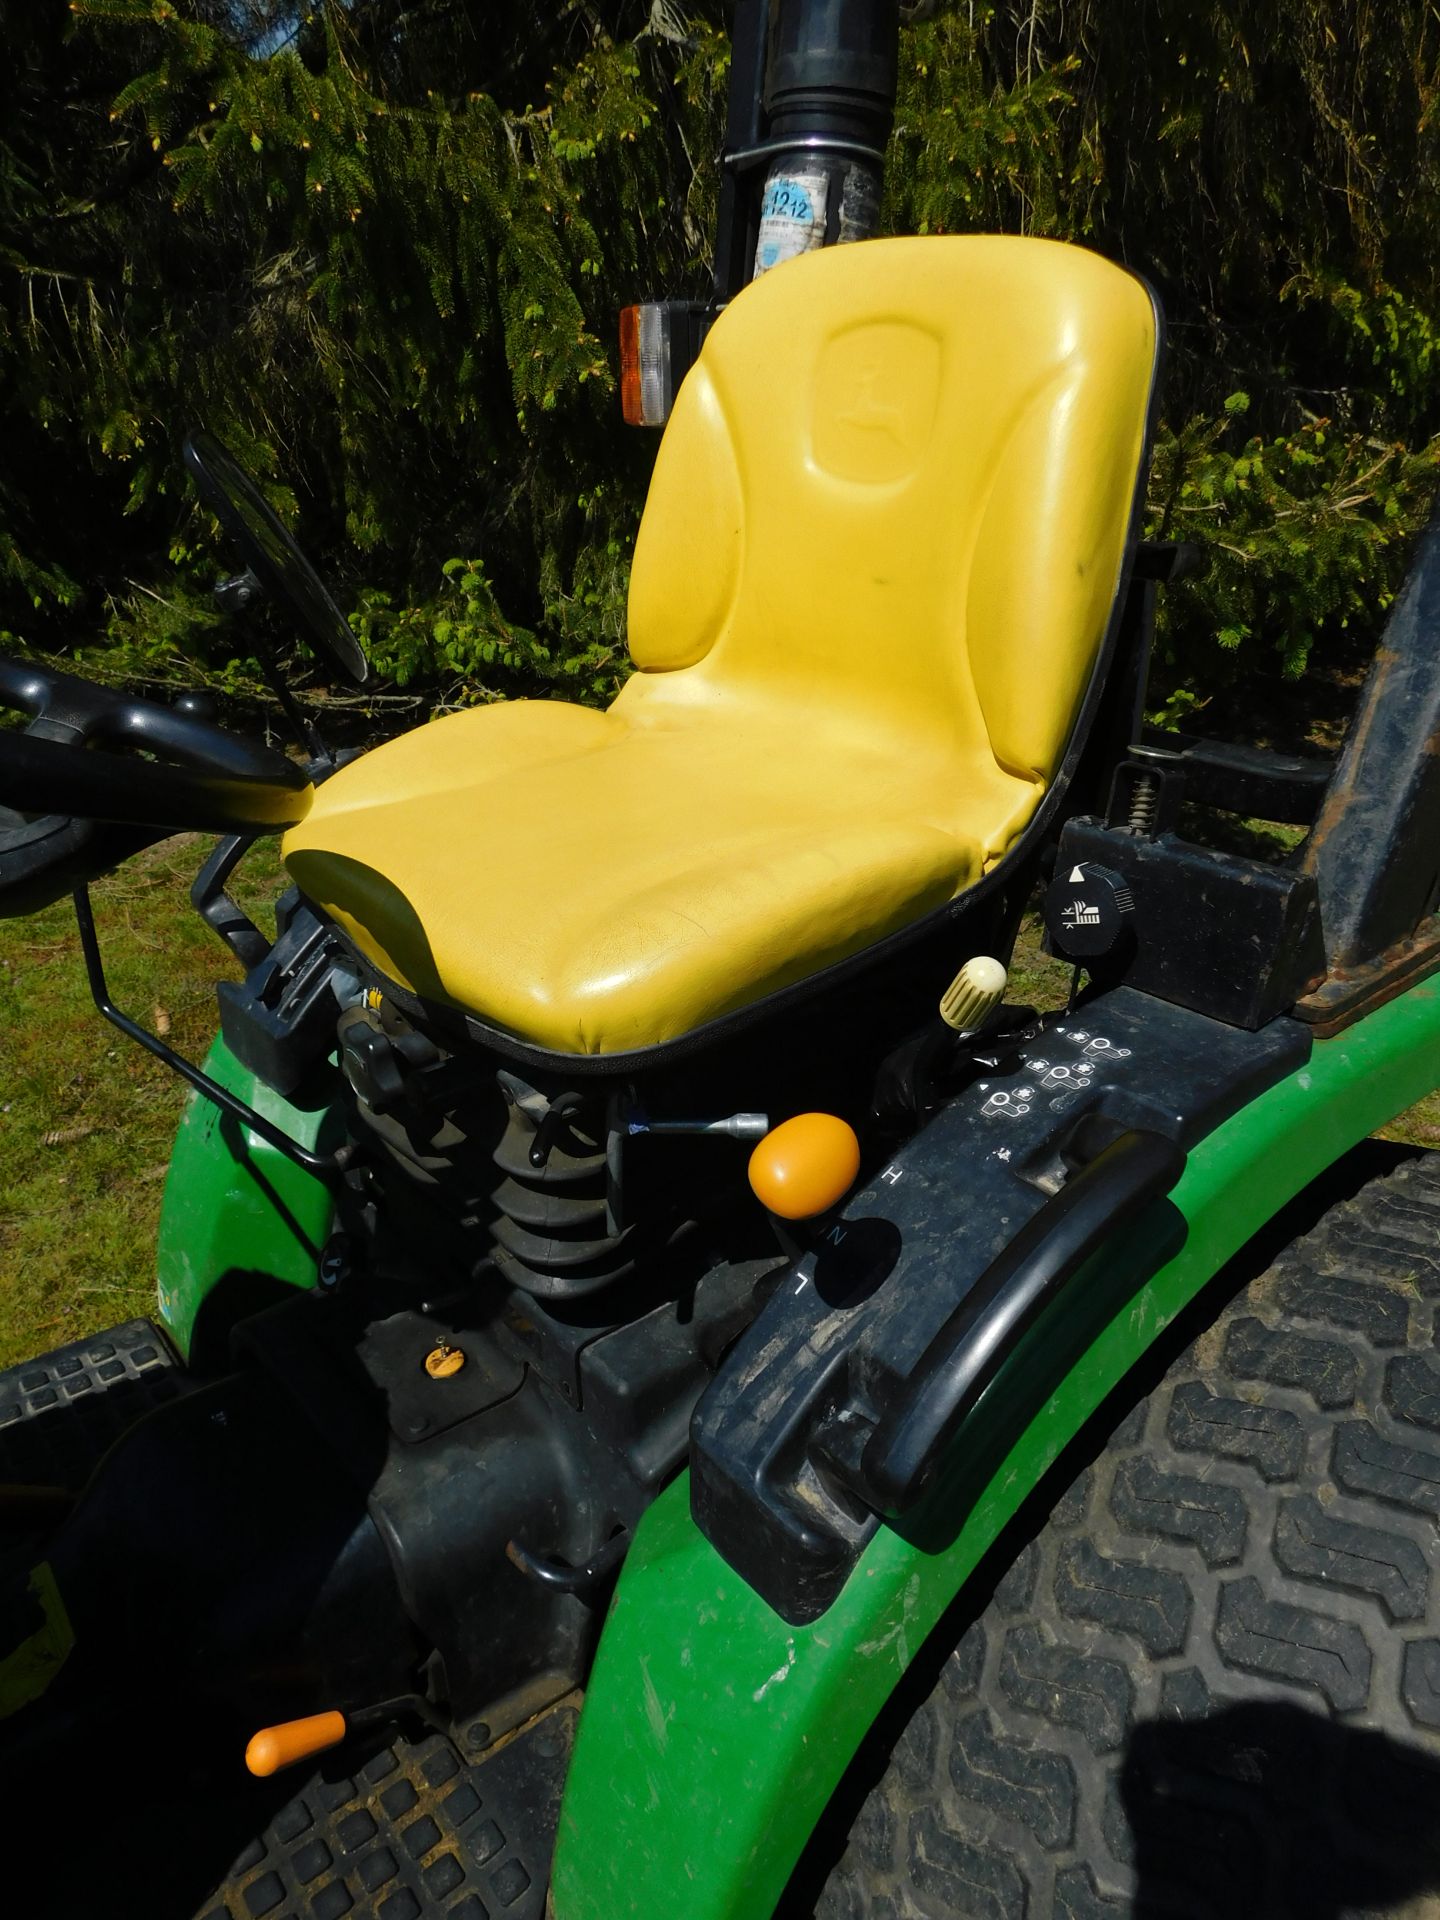 John Deere 2520 Compact Tractor, AU60 DDV, First Registered 6th January 2011, 770 Hours with Spare - Image 8 of 10